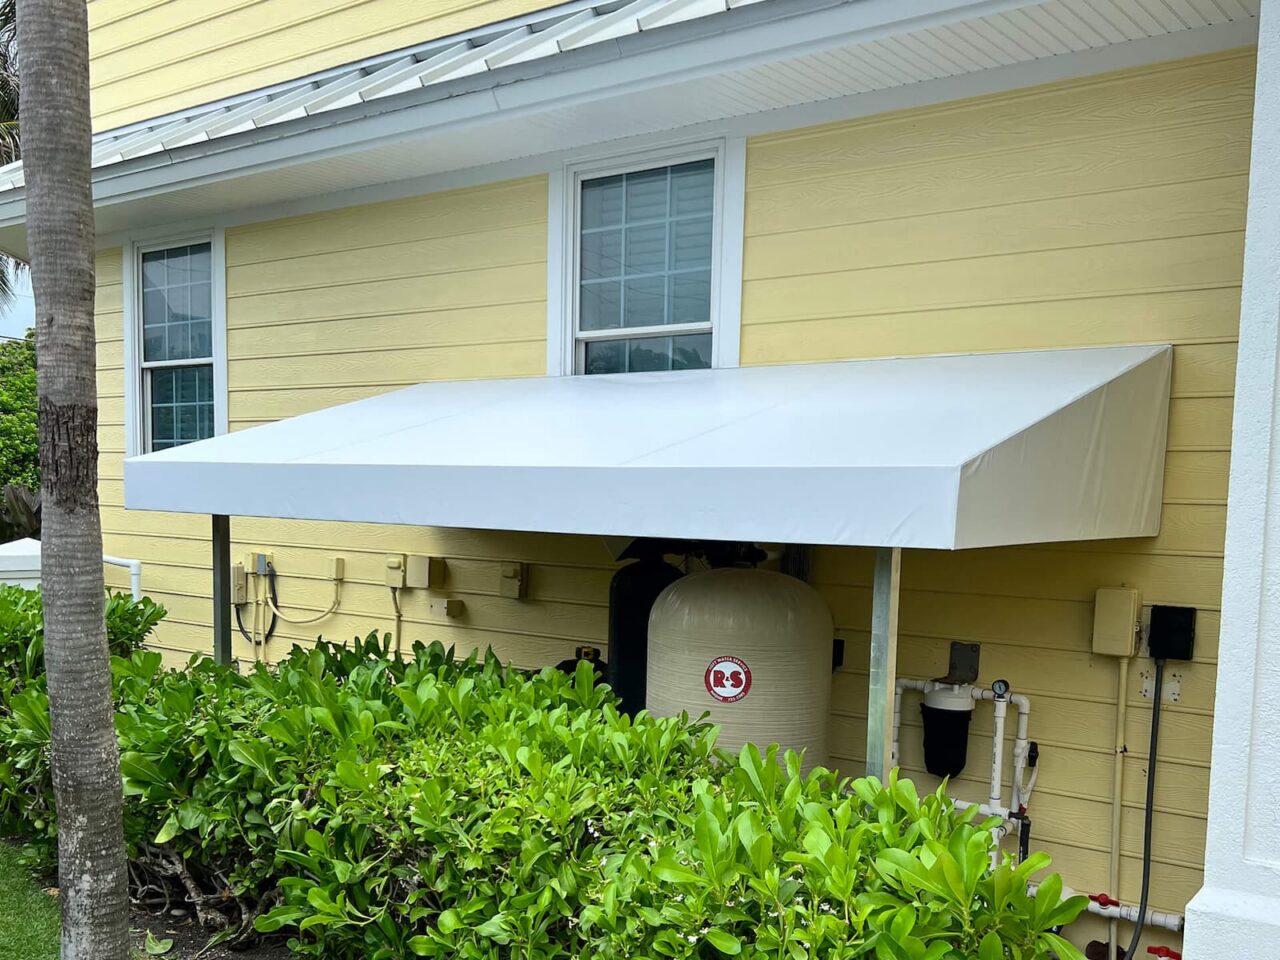 ABC Awnings: A Shade Above the Competition